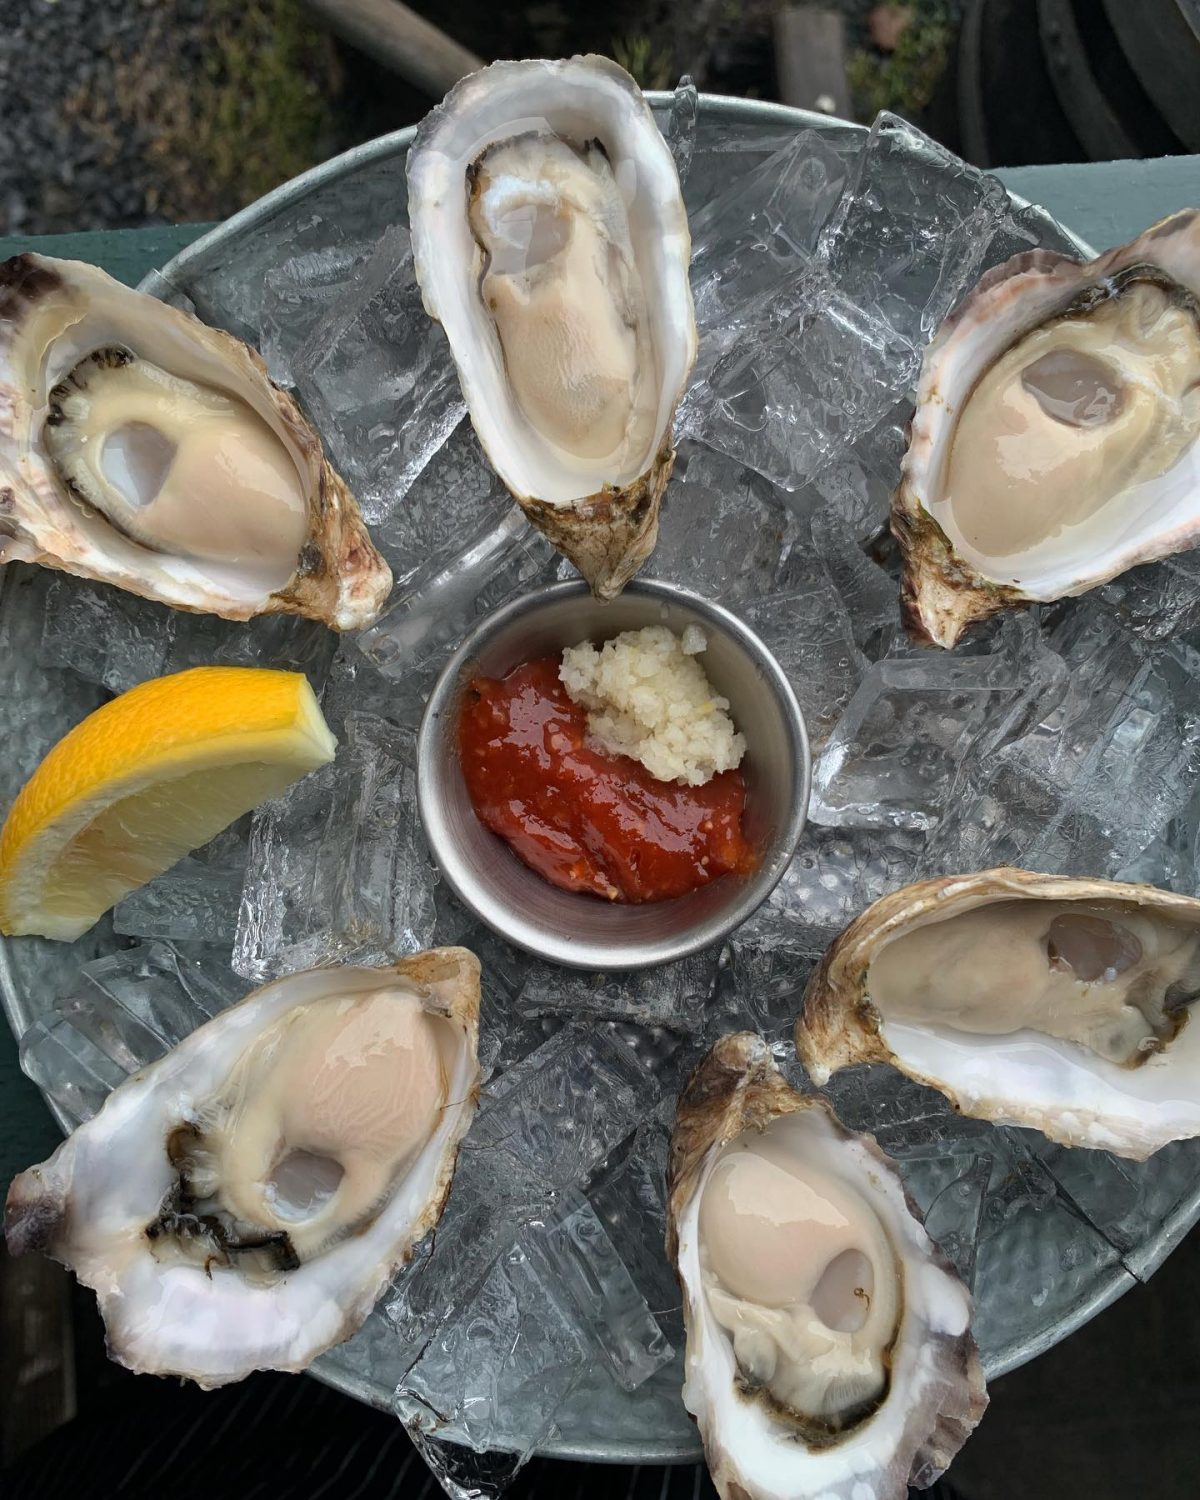 Fresh oysters with a slice of lemon served on ice from The Cookery in Seward.